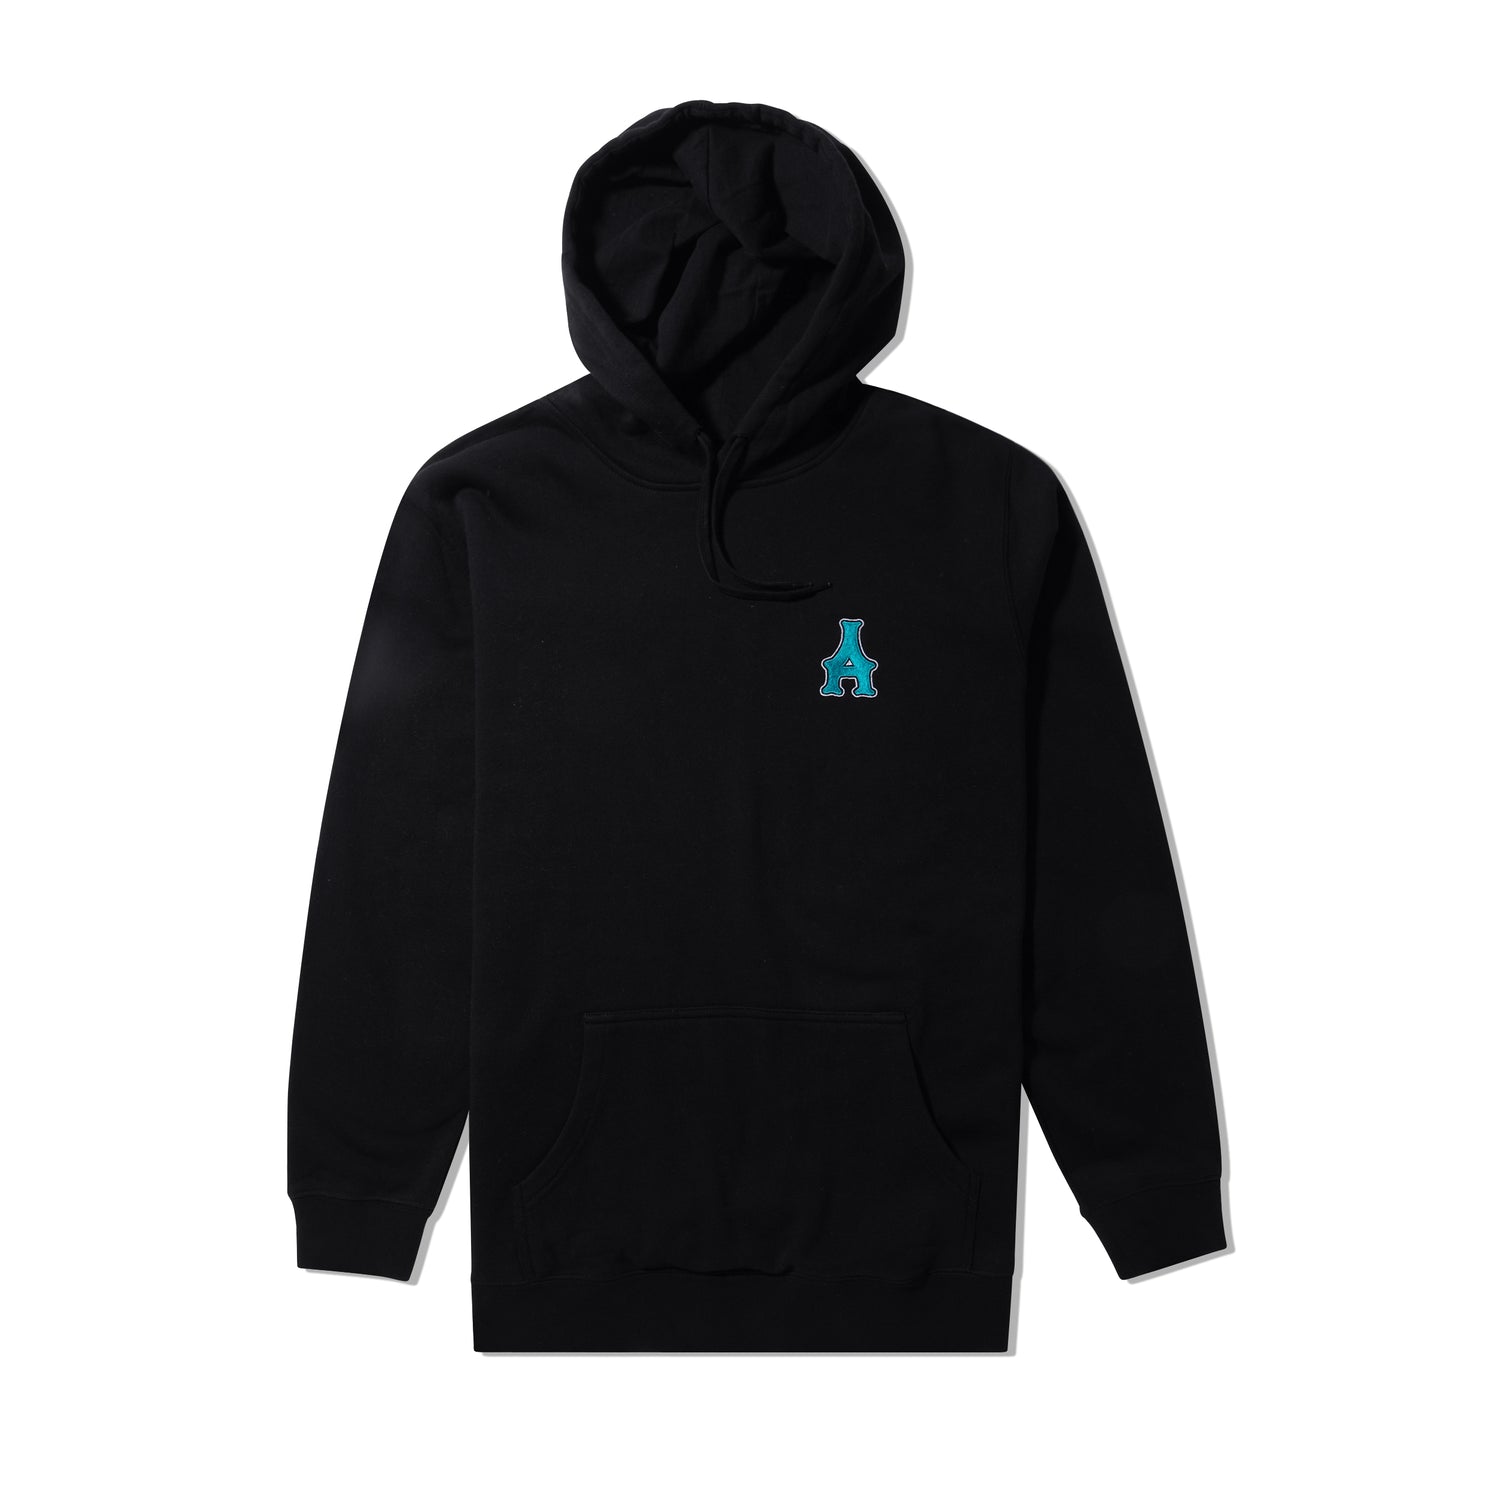 A Pullover Sailing Colours, Black